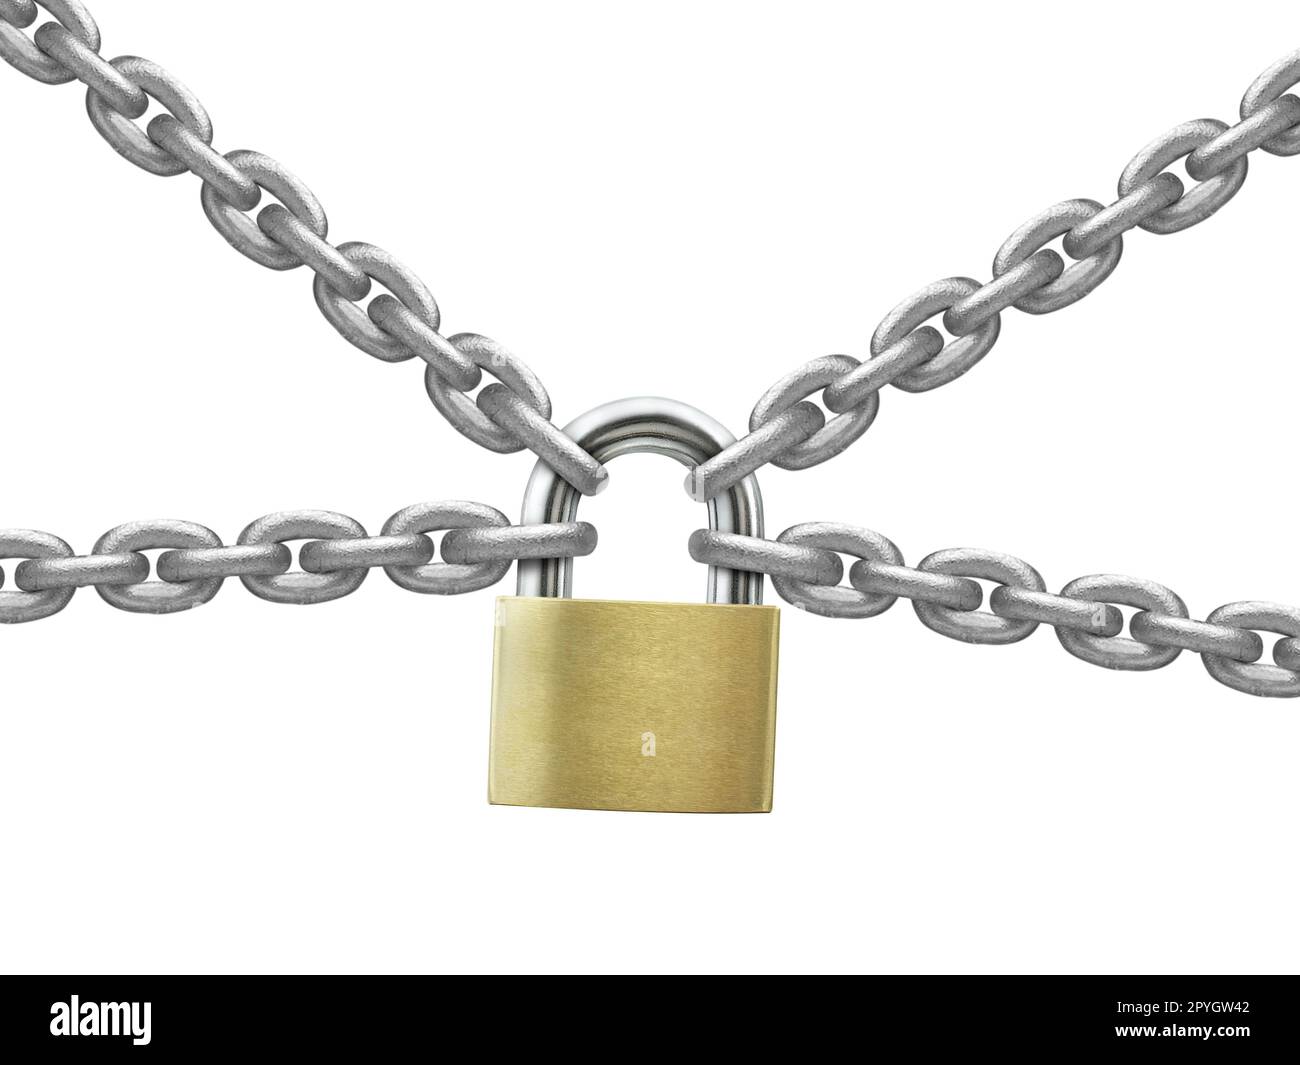 The gray metal chain and padlock on white background Stock Photo